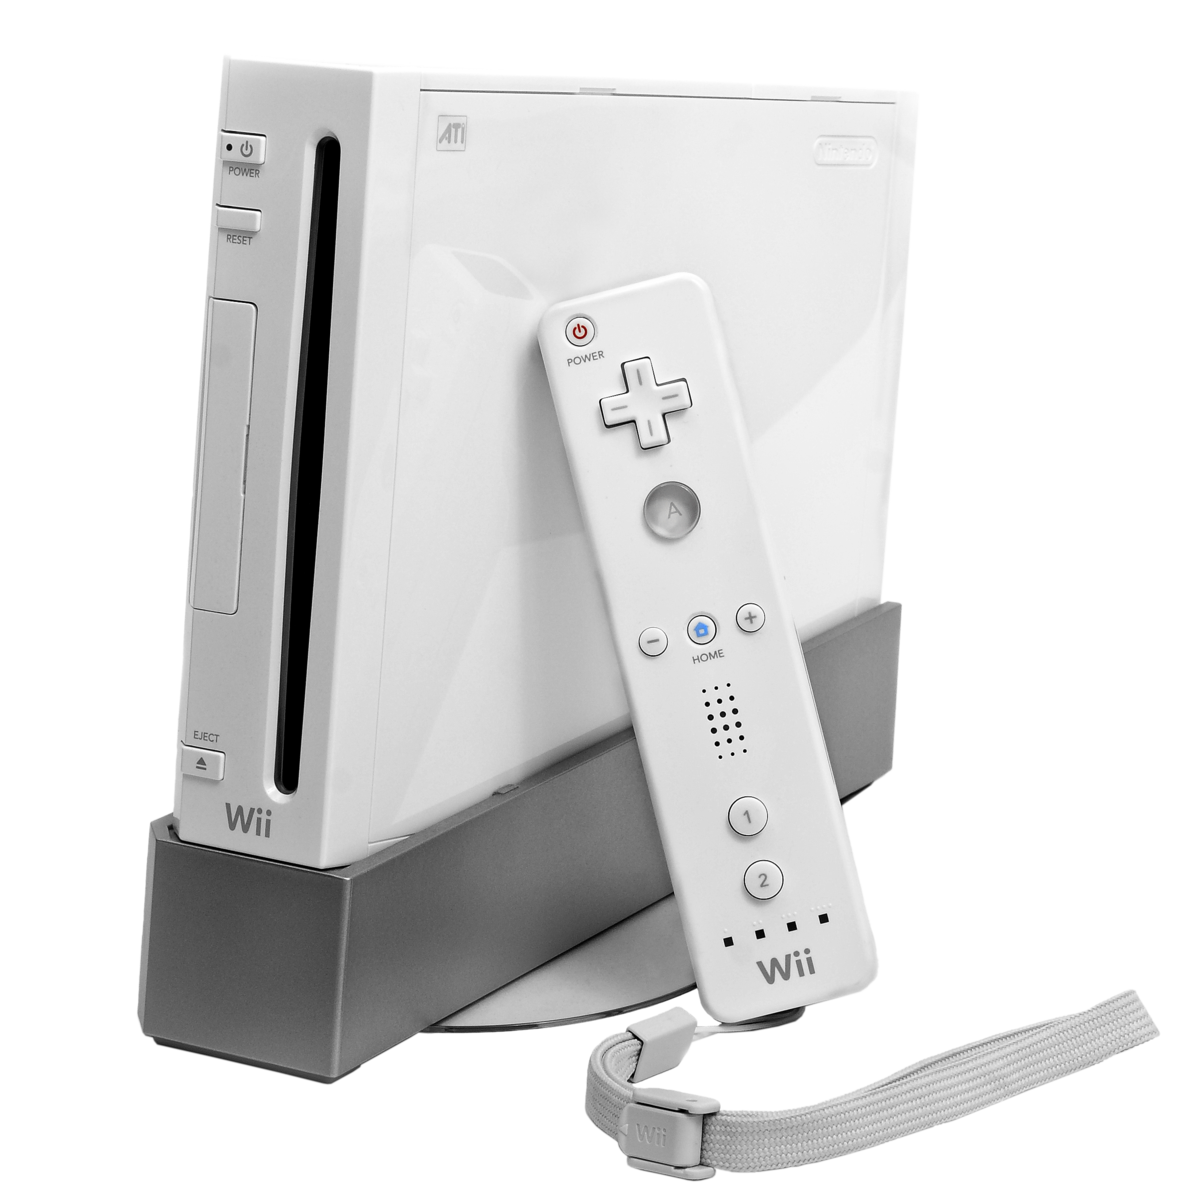 Troubleshooting Your Nintendo Wii: Why Won't It Turn On? 1